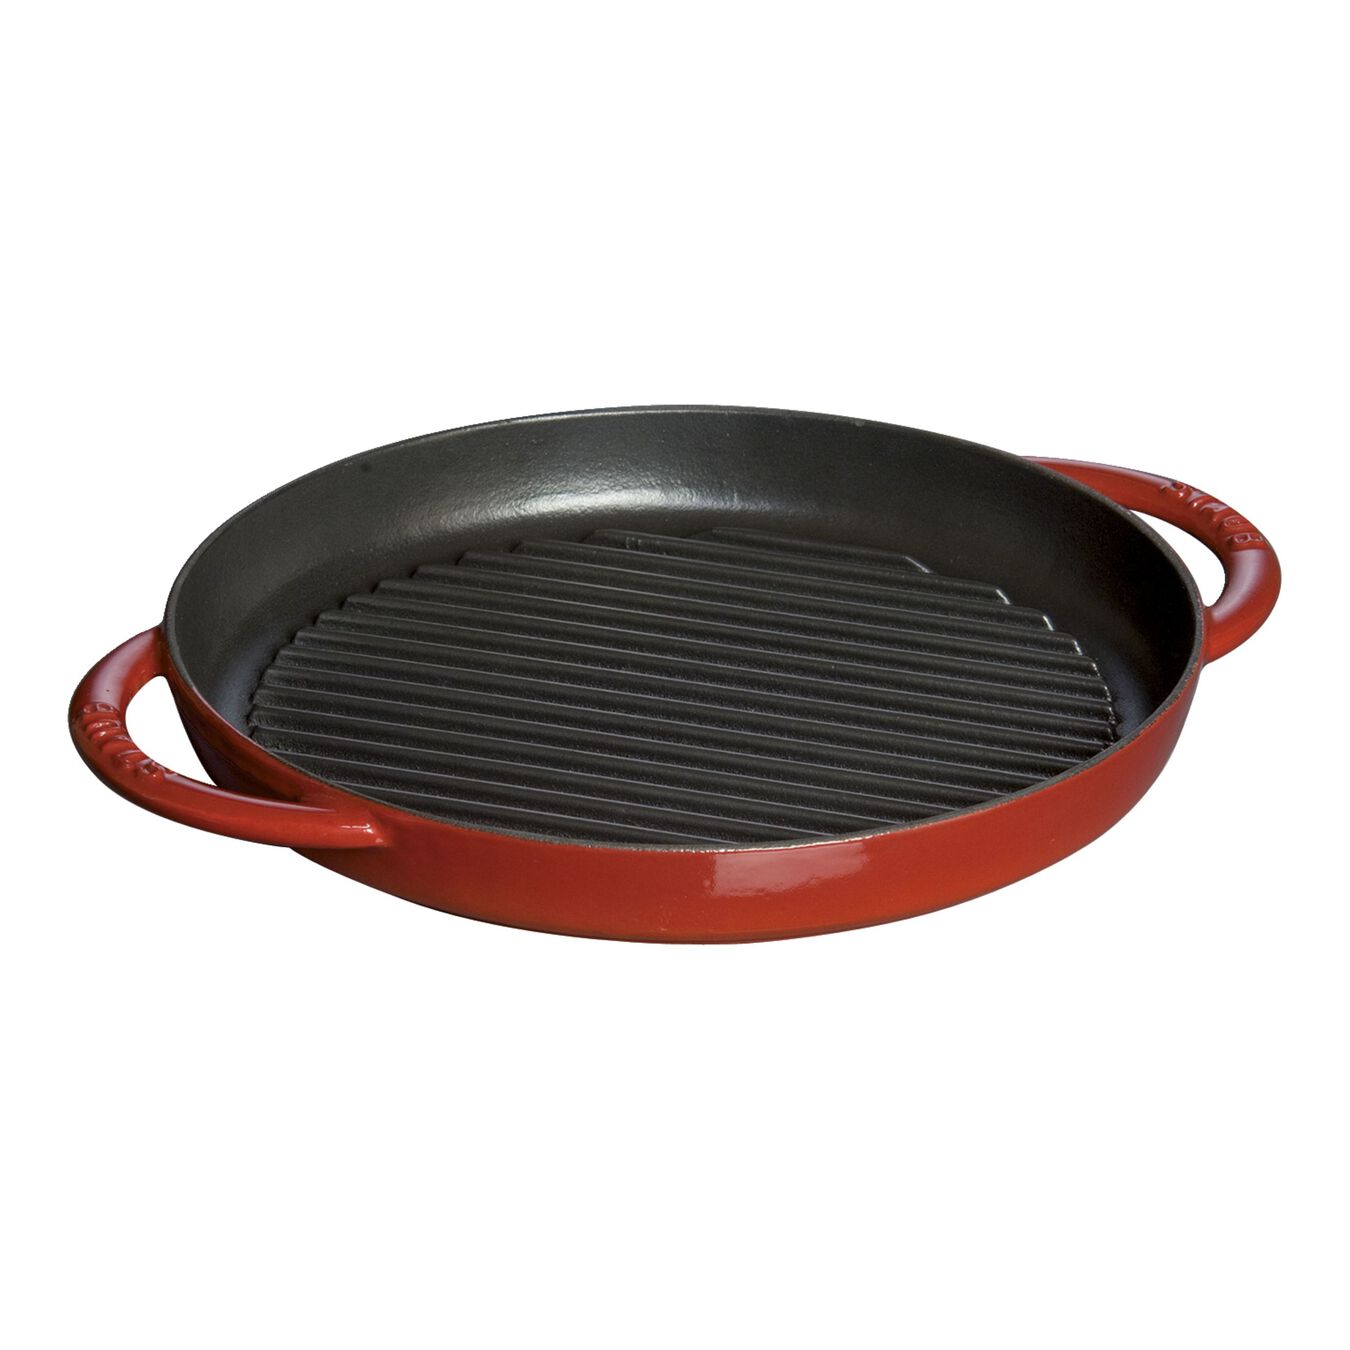 26 cm cast iron round Pure Grill, cherry,,large 1